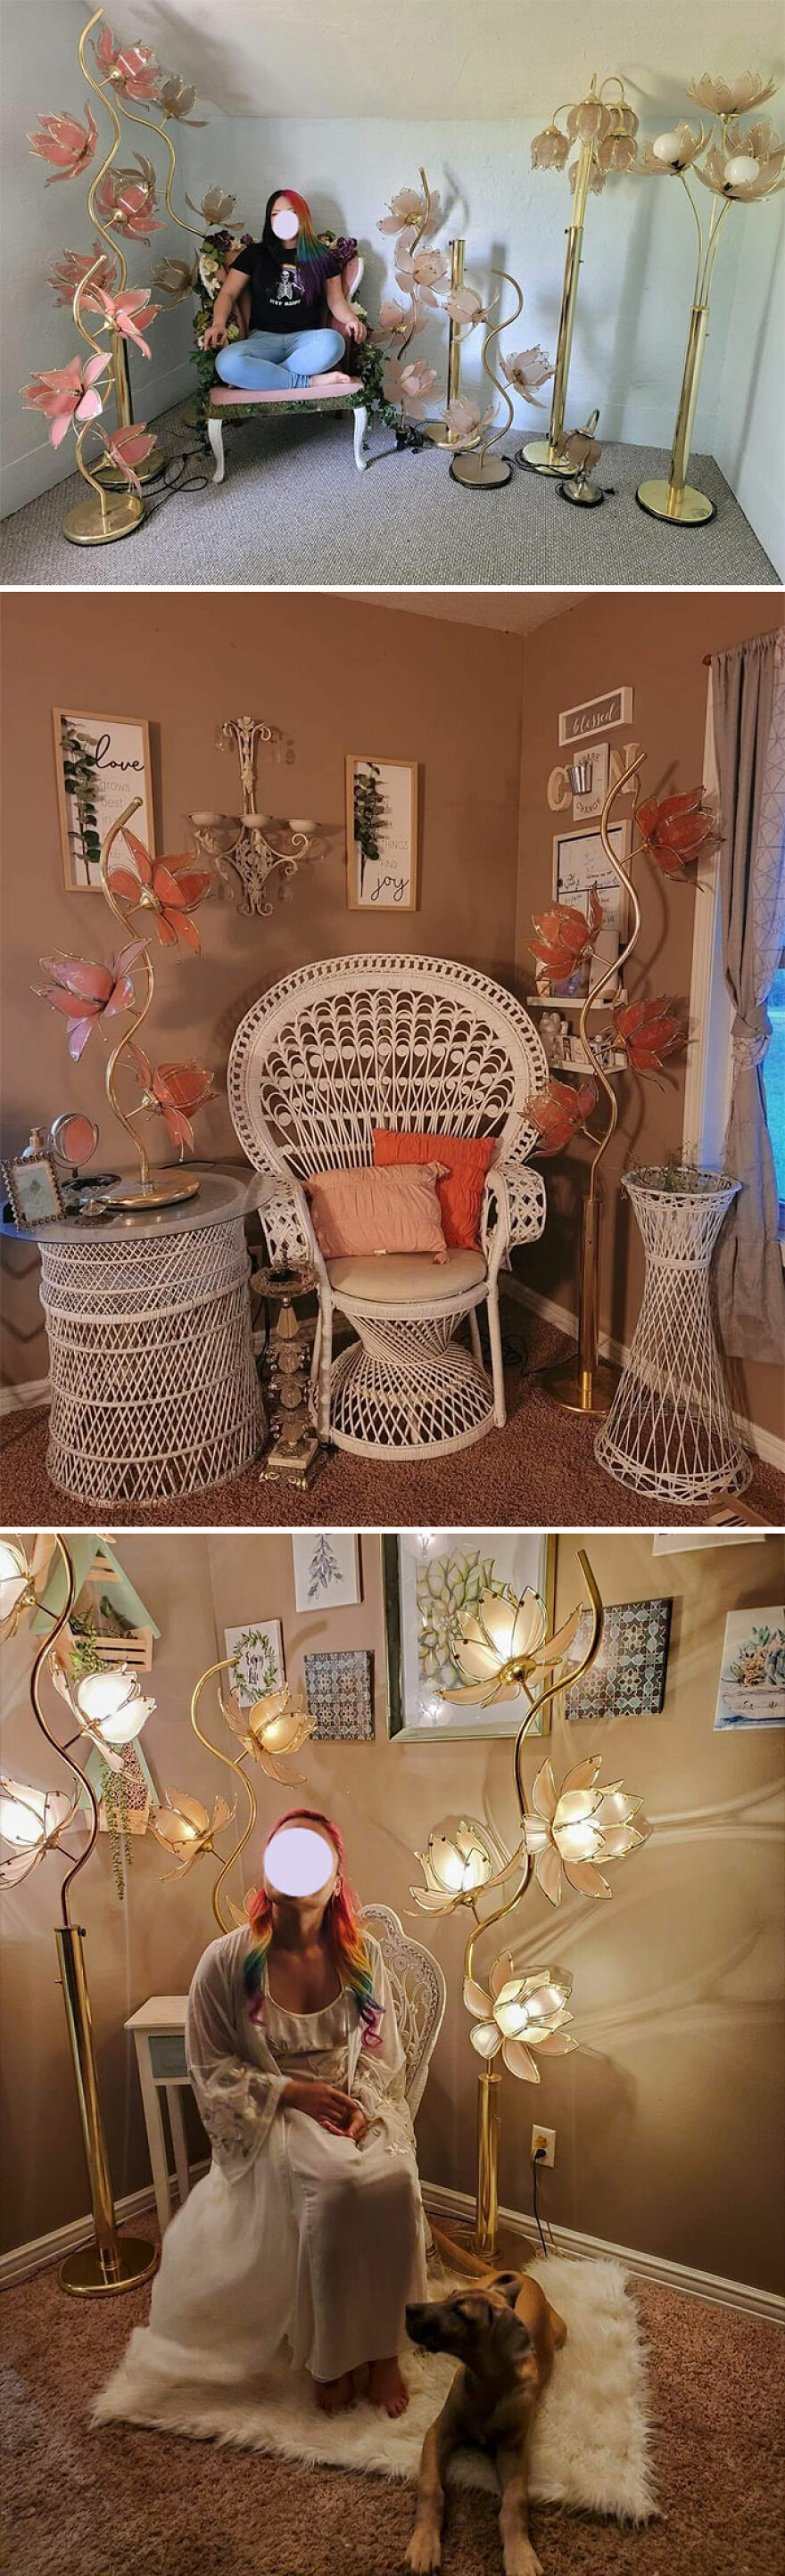 I Have Four White Ones Not In The Photos. I Had To Limit Myself To Three Photos! Lol. Hi, I'm Crystal, And I Am Obsessed With And Collect Vintage Lotus Lamps! I'll Have To Get Photos Of My White Ones. Since They're All Antique, They're All Thrifted! Facebook Marketplace, Estate Sales, And My Wife Even Gifted Me One For My Anniversary. She Found It On A Buy Nothing Site And Restored It For Me. I Just Figured If My Obsession Would Be Appreciated Anywhere, It Would Be Here. 🥰